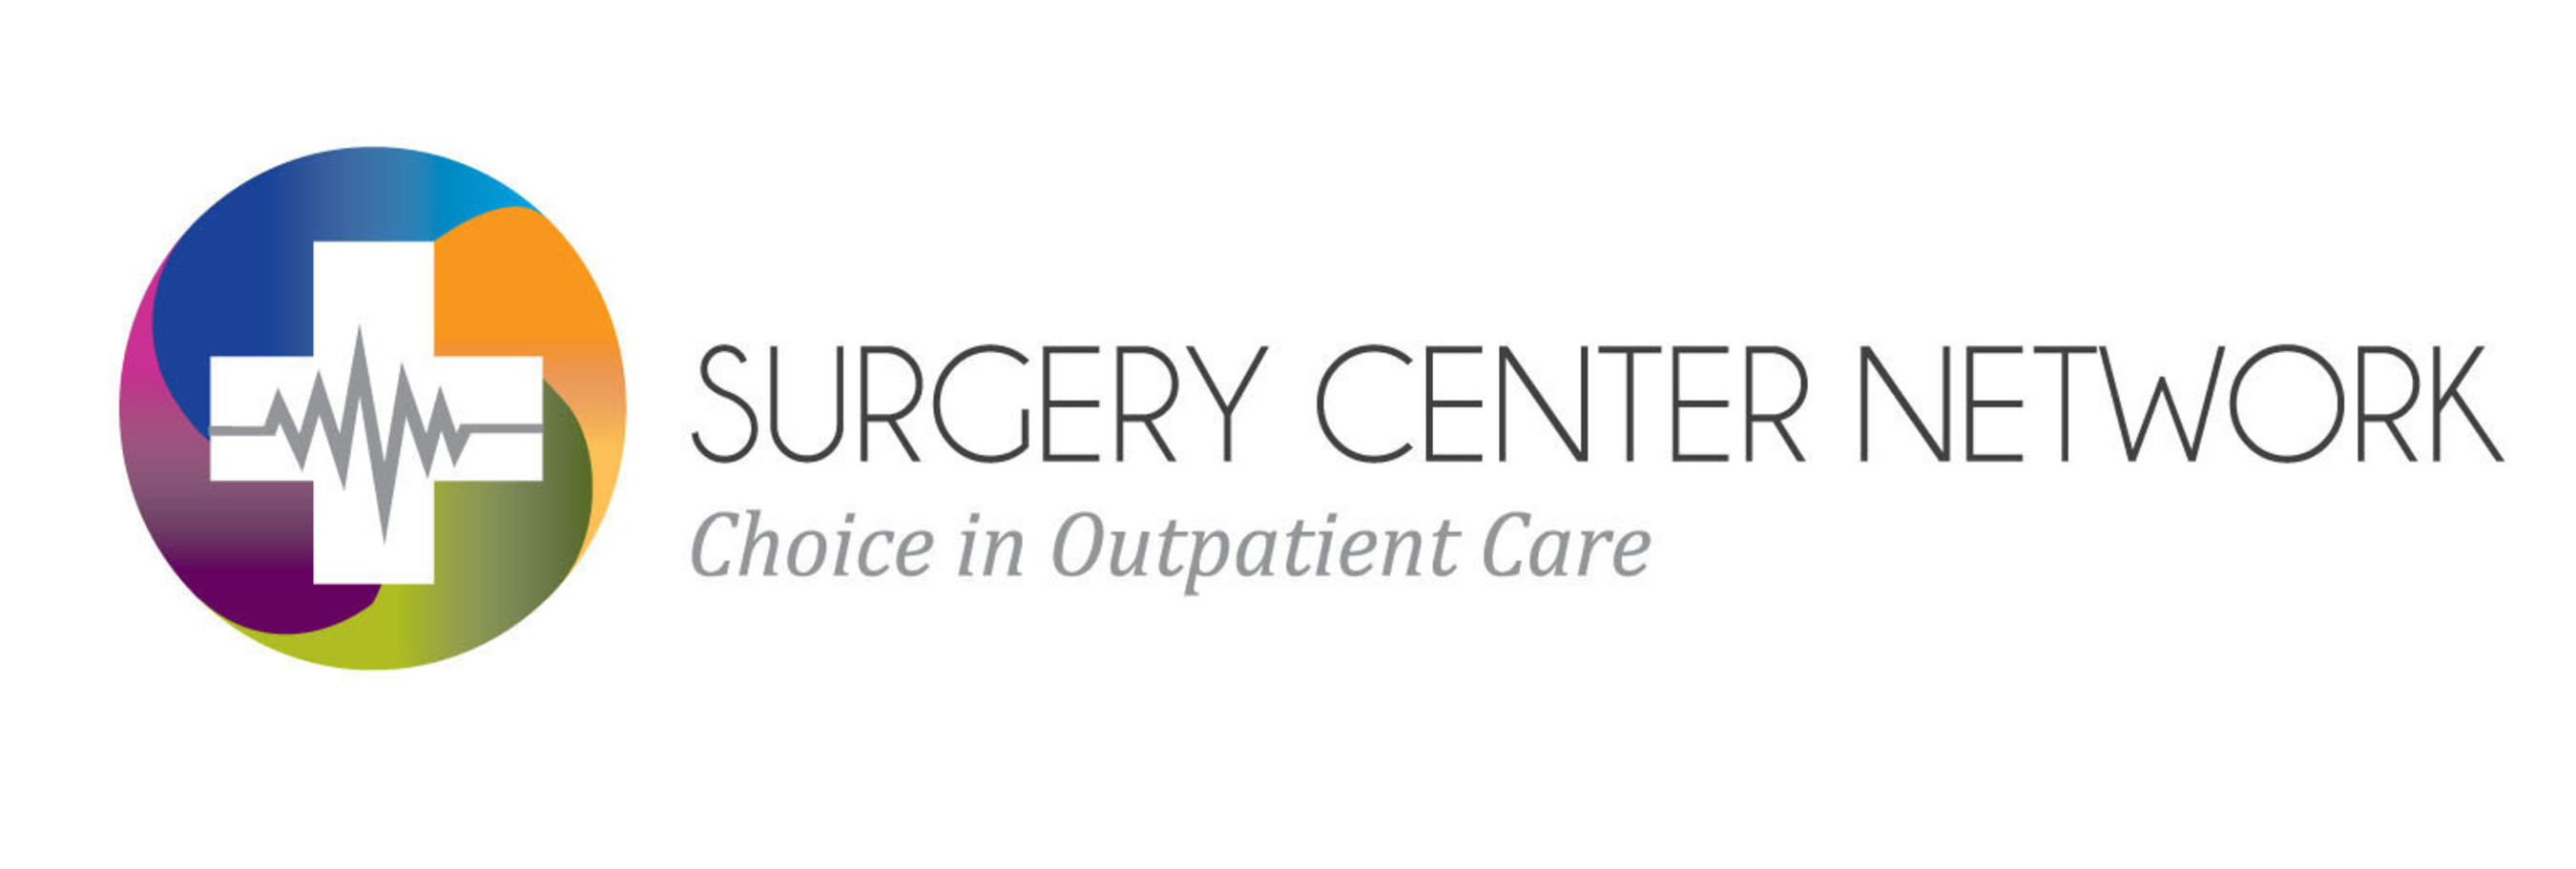 Surgery Center Network (SCN), hosted at  www.SurgeryCenterNetwork.com , features an established network of ambulatory surgery centers. By accessing the network, users can perform surgery cost comparisons, receive surgery education and outcomes data, and conduct searches to locate and evaluate ASCs nationwide. Surgery centers joining the SCN network receive significant benefits, including a comprehensive listing and direct link to their website, and increased exposure to self-funded group health, work-related and cash-paying patients. Sister company Surgical Notes ( www.surgicalnotes.com ) has been an industry-leading provider of medical transcription, coding and other value-added information services for ambulatory surgical centers for more than 15 years. (PRNewsFoto/Surgery Center Network) (PRNewsFoto/SURGERY CENTER NETWORK)